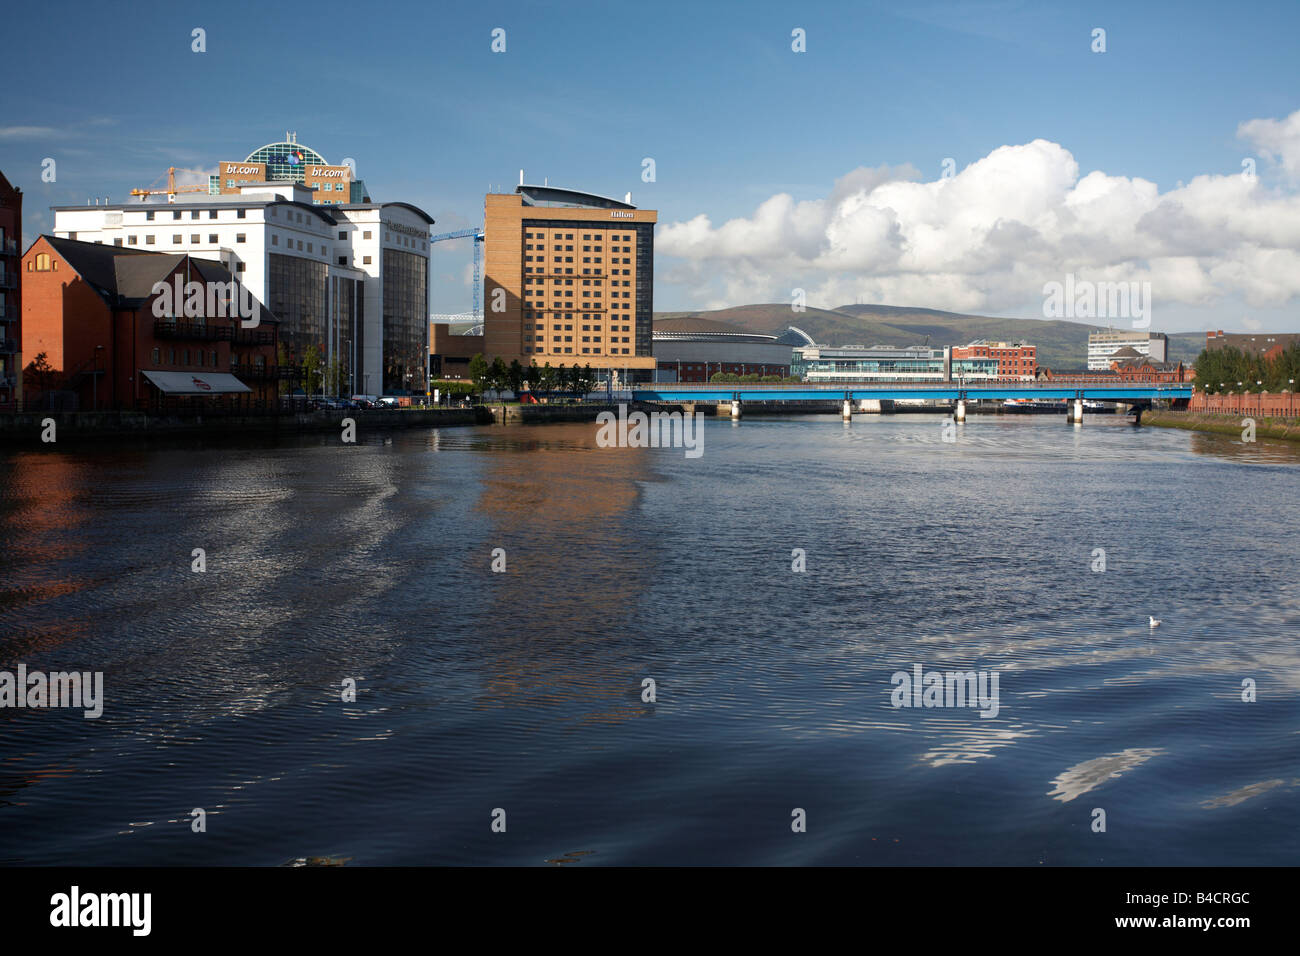 modern office buildings and hilton hotel along the river lagan belfast city centre northern ireland uk Stock Photo